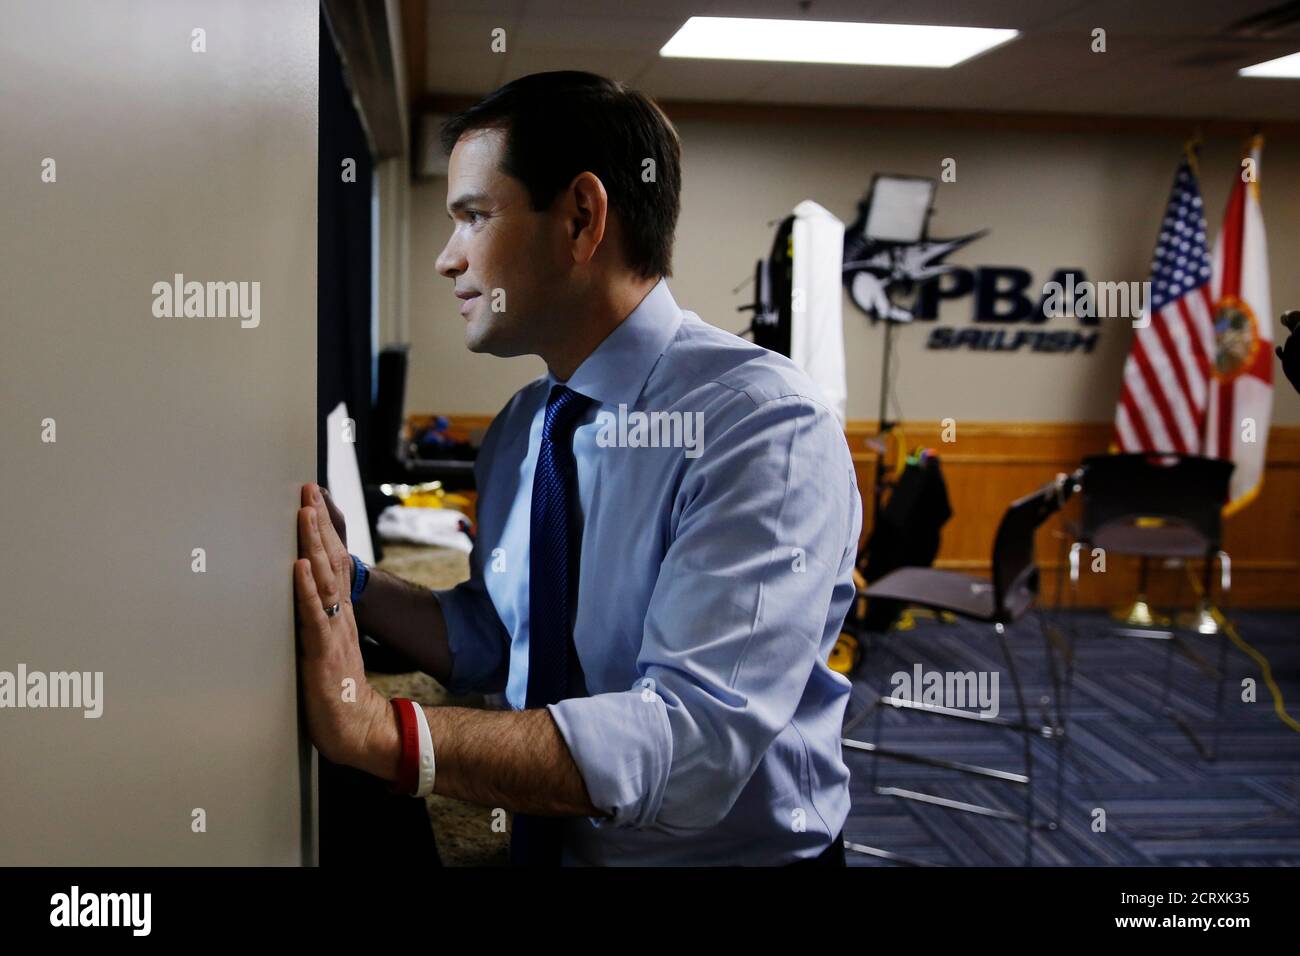 Republican U.S. presidential candidate Marco Rubio peeks into the arena before being introduced at a campaign event at Palm Beach Atlantic University in West Palm Beach, Florida March 14, 2016.     REUTERS/Carlo Allegri     TPX IMAGES OF THE DAY Stock Photo